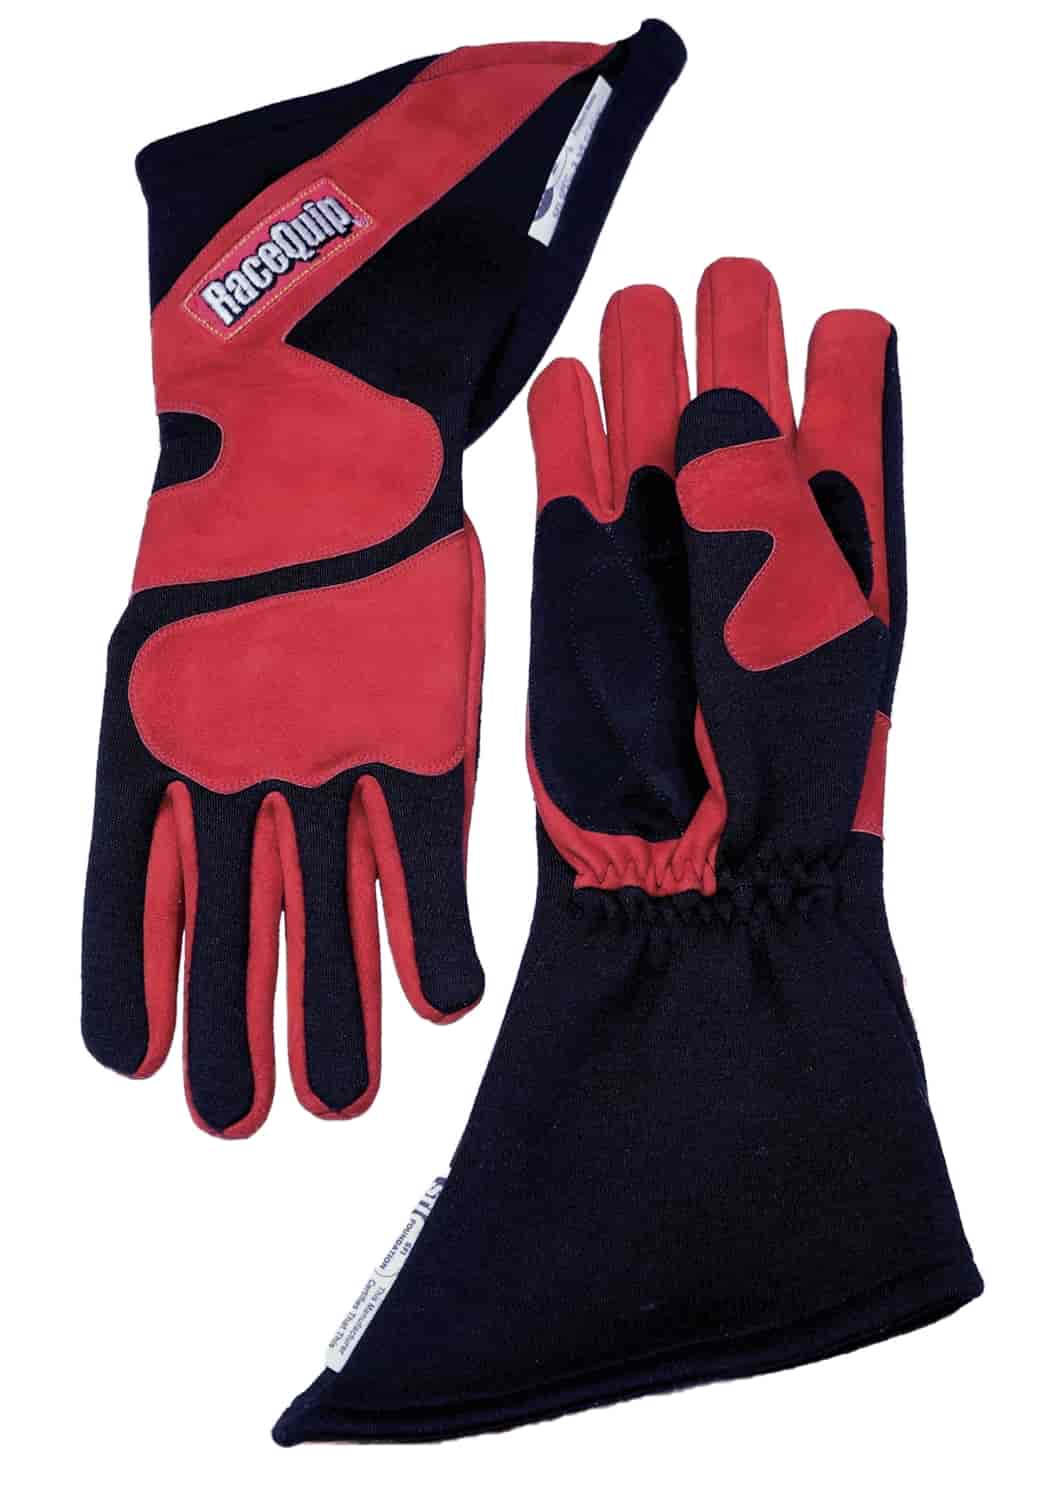 SFI-5 358 Series Long Angle Cut Driving Gloves Red/Black X-Large